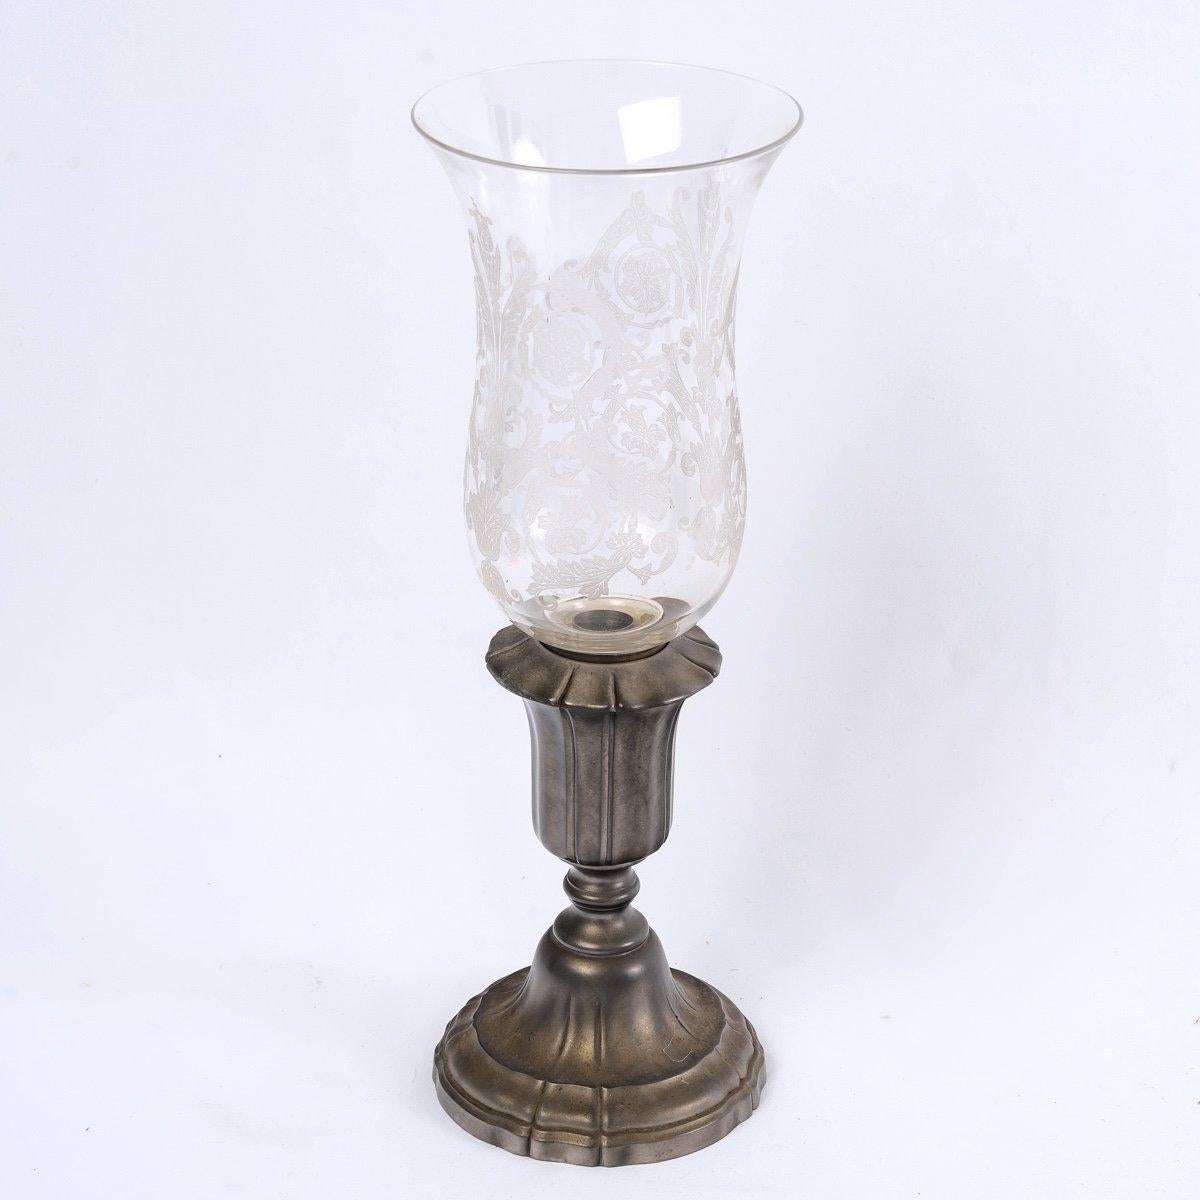 Tealight Candlestick Lamp - Baccarat Crystal And Pewter From The Manor - XX th In Excellent Condition For Sale In CRÉTEIL, FR